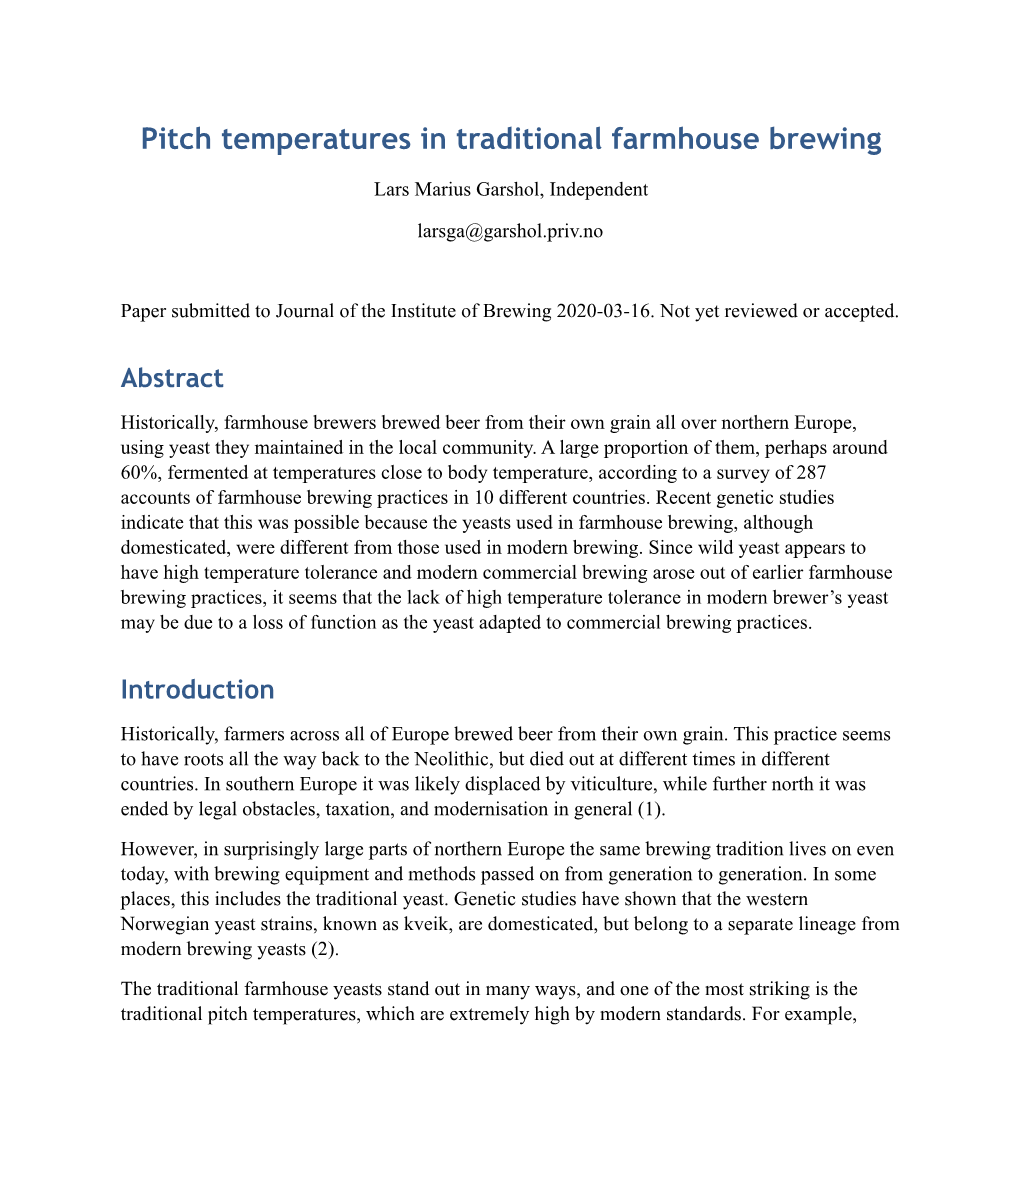 Pitch Temperatures in Traditional Farmhouse Brewing